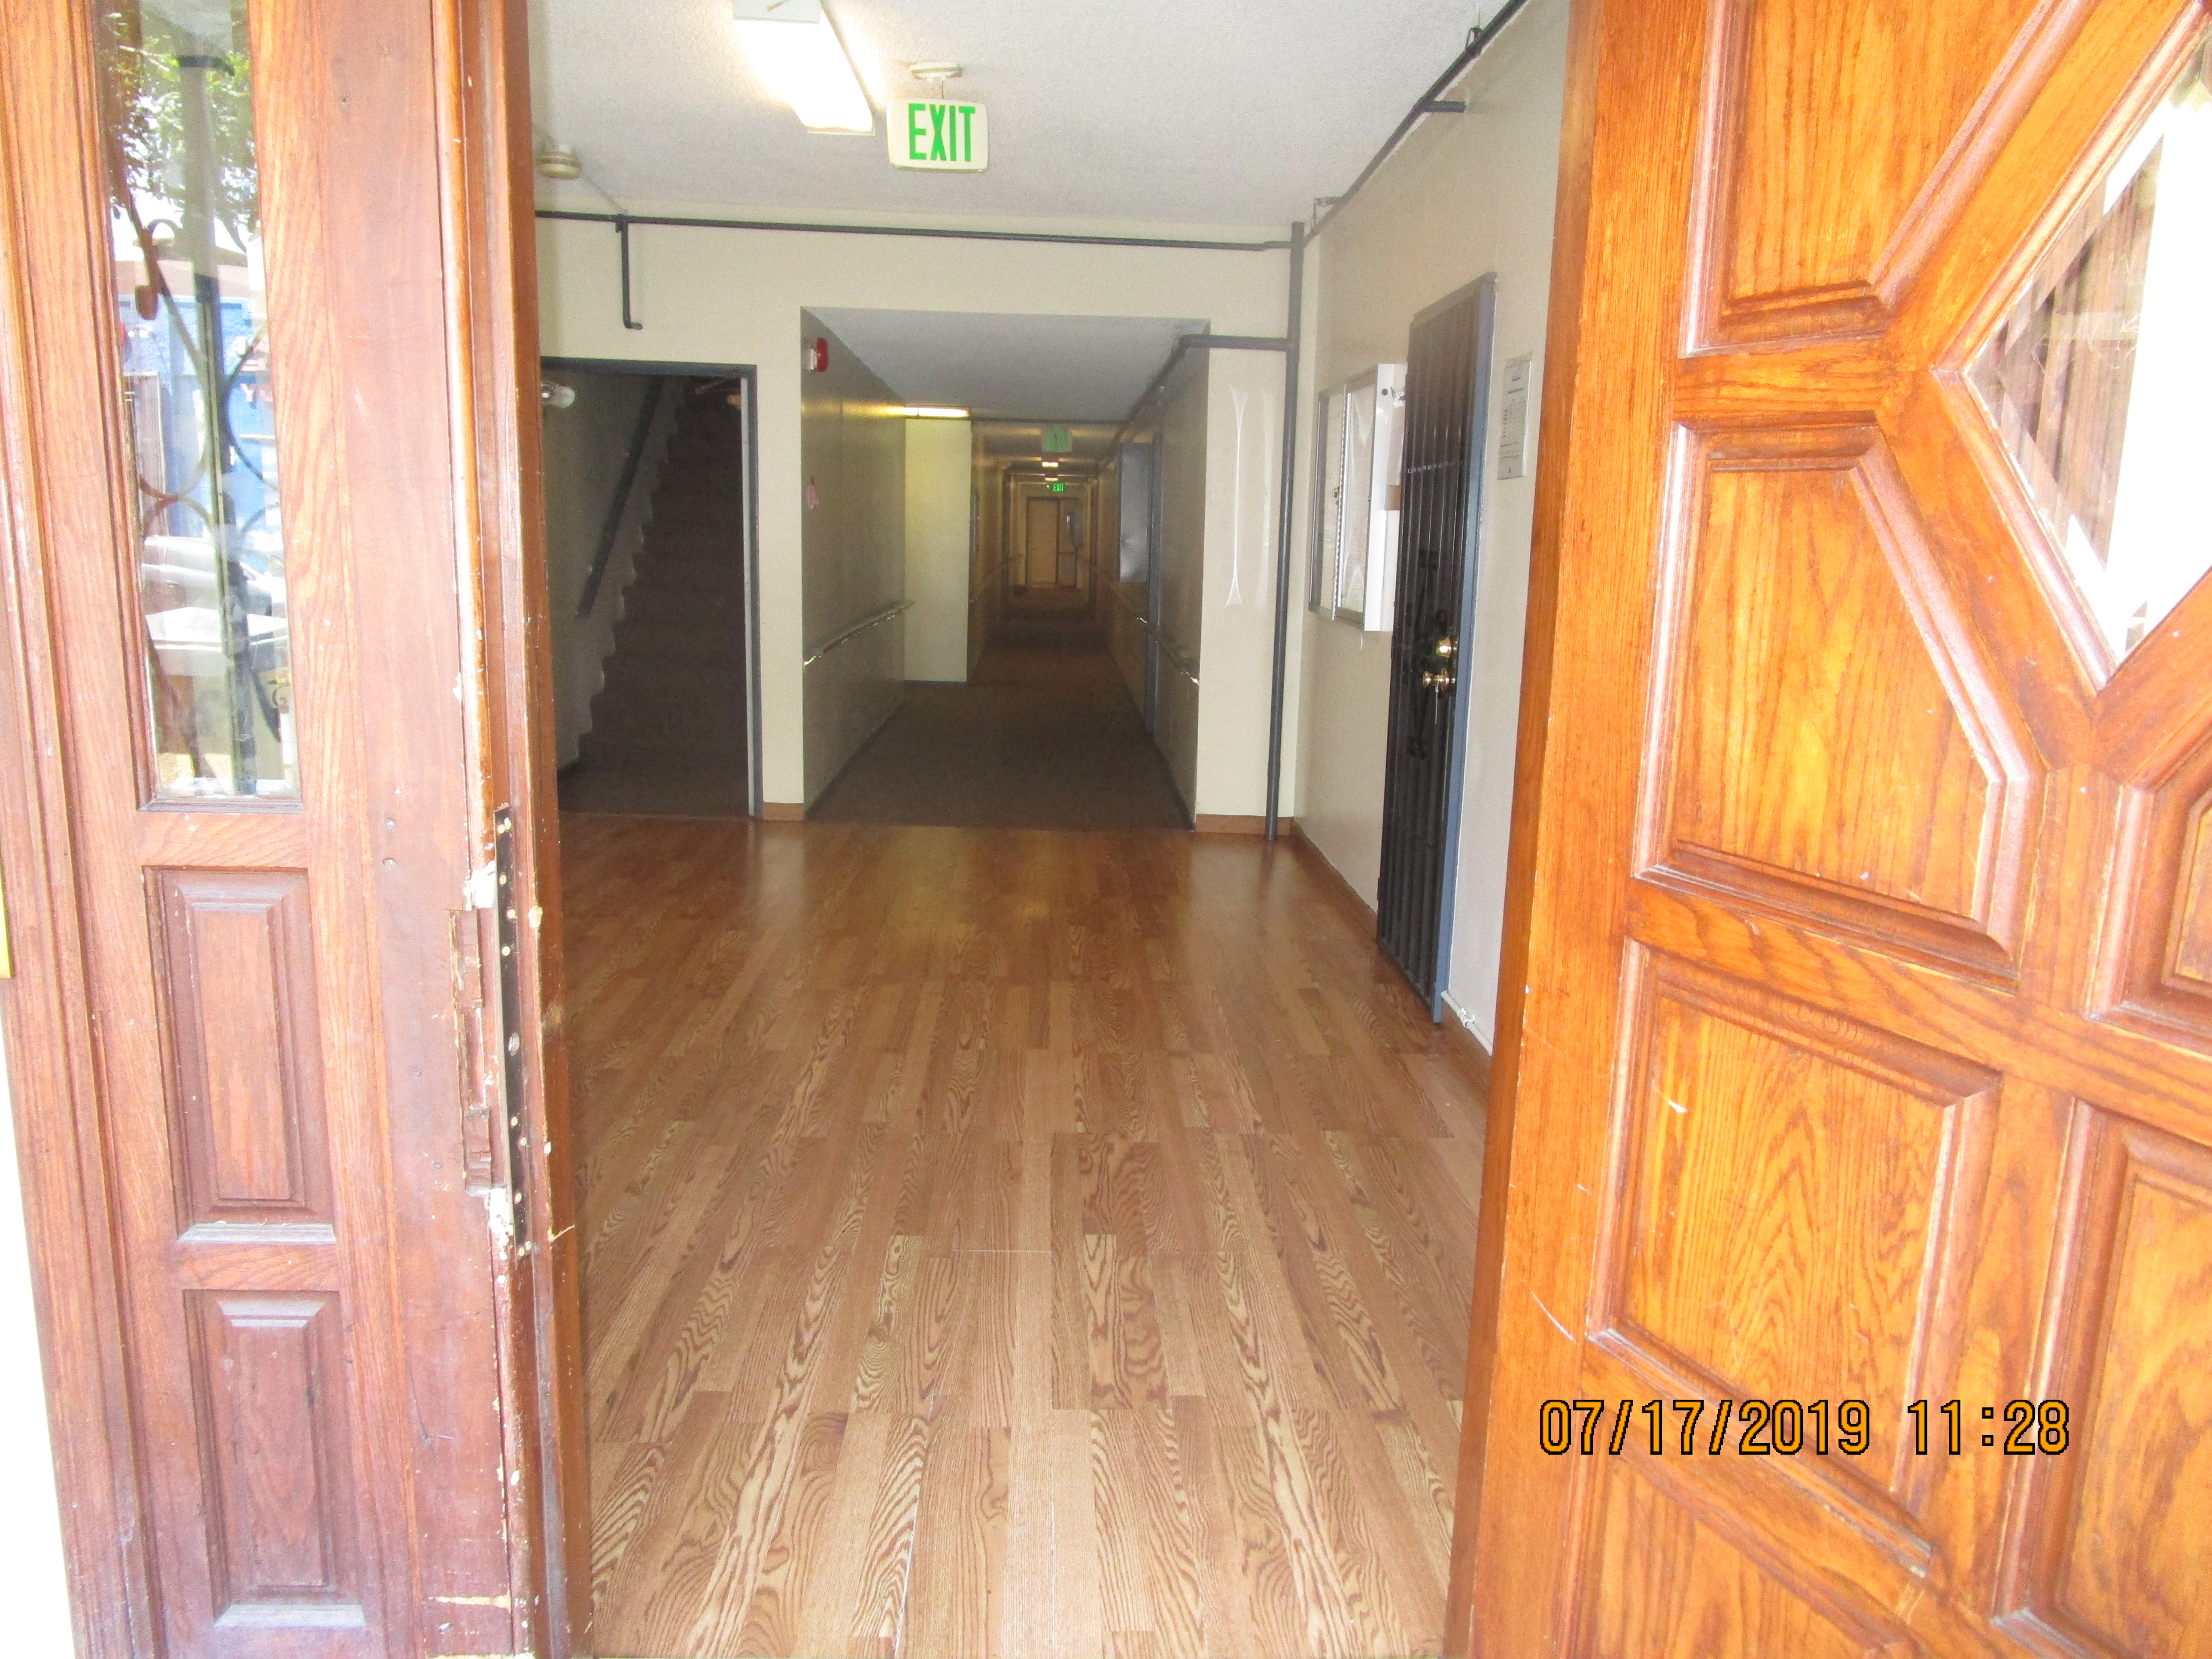 Close up view of the front entrance through the open front door at Leeward A&B Apartments